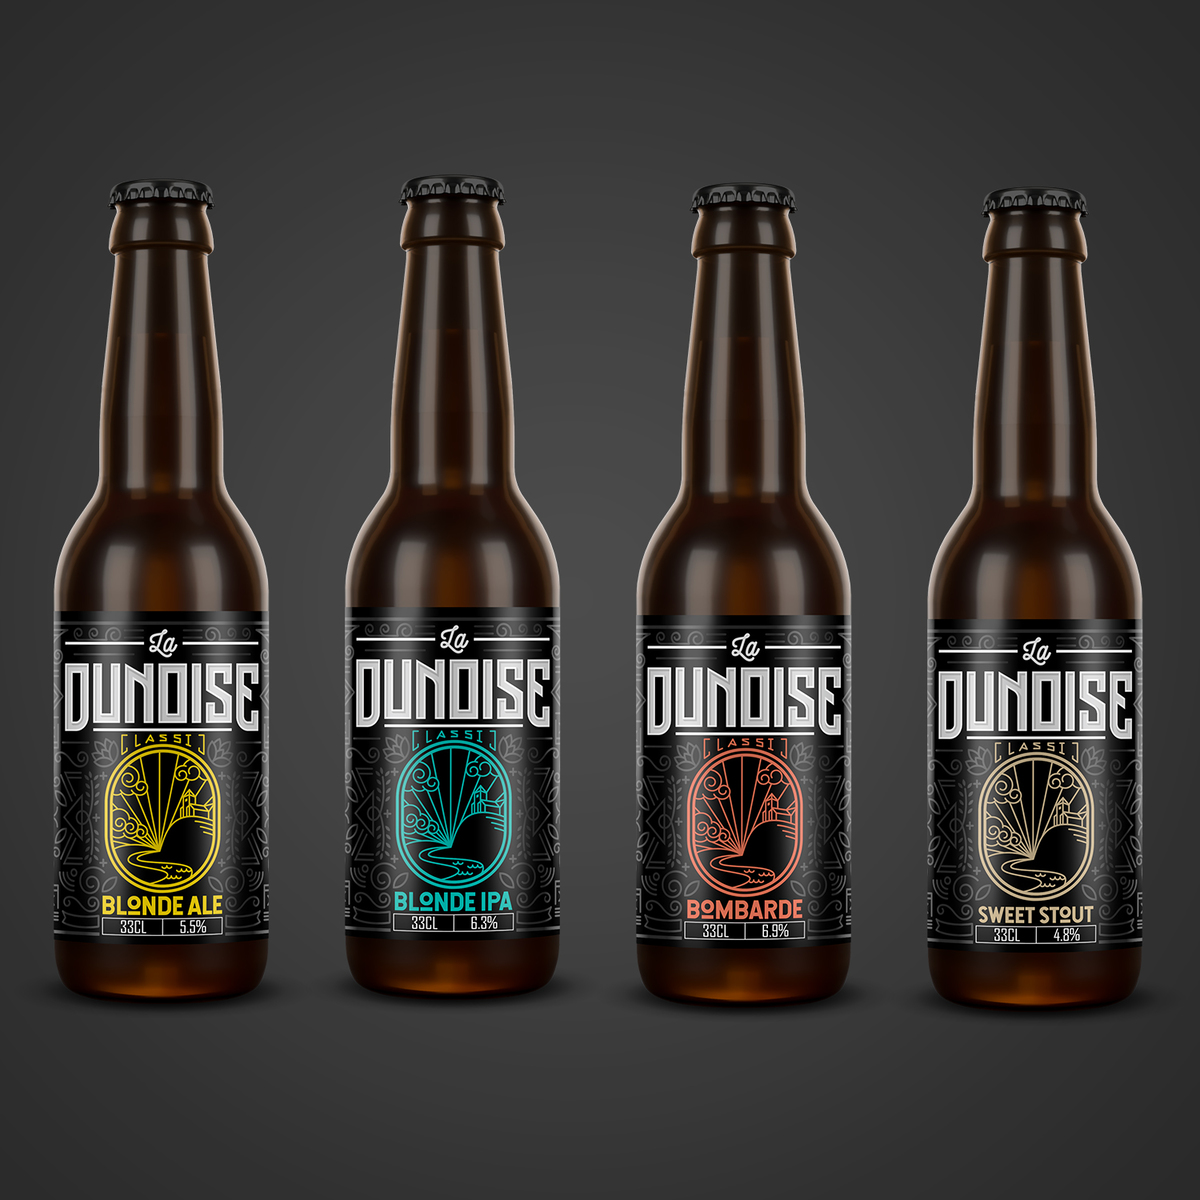 Packaging Design for French Beer Brand La Dunoise